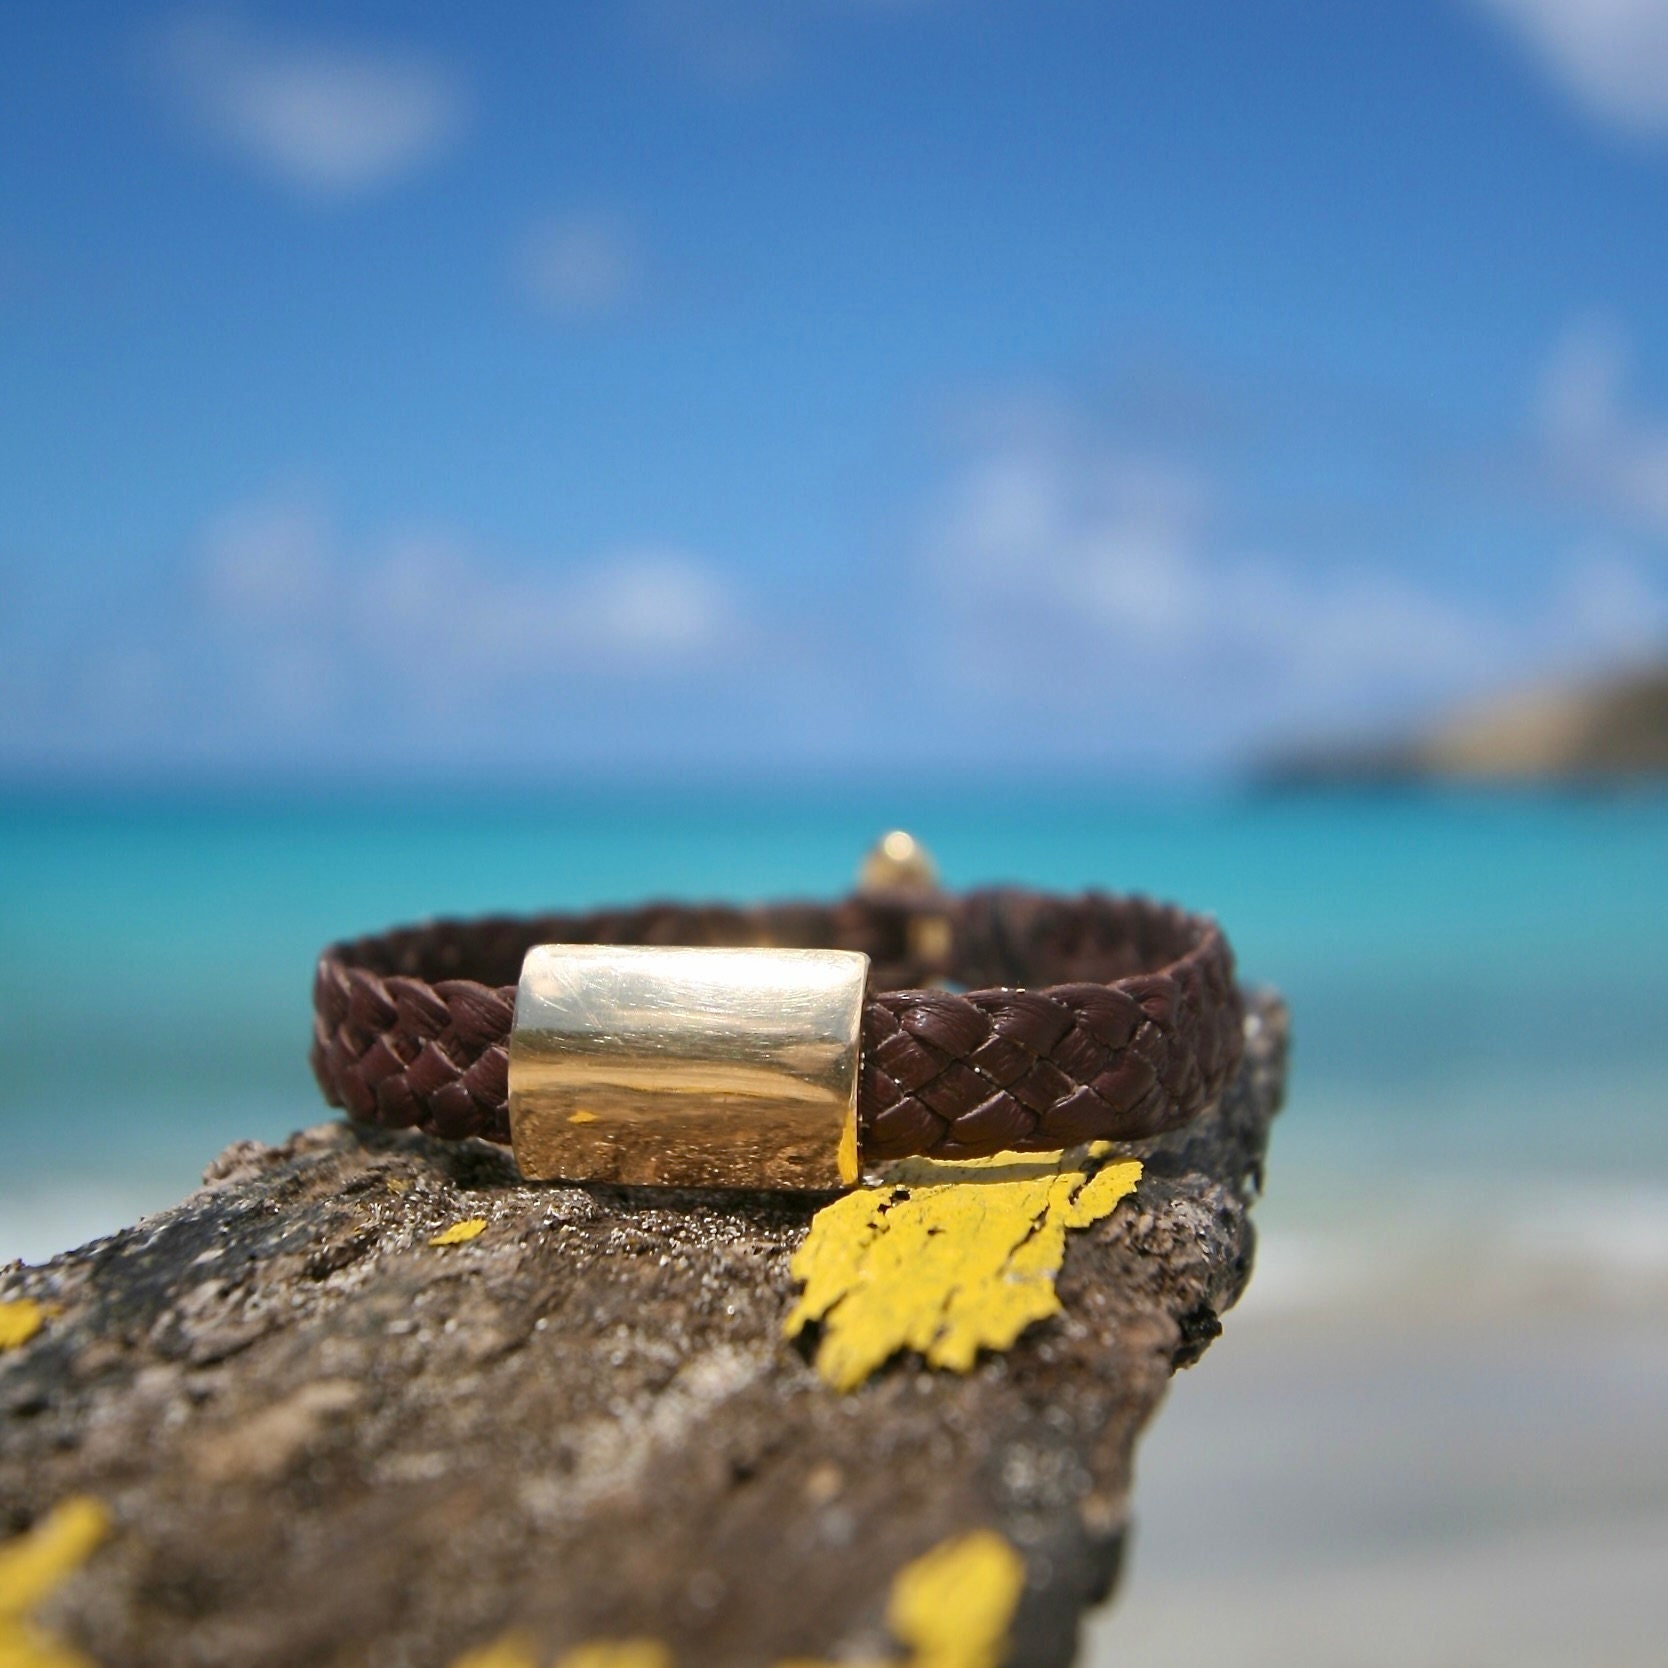 Gold and leather unisex bracelet made in St Barth Island, solid 18K plain gold mounted on leather, handcrafted jewelry From Saint Barthelemy